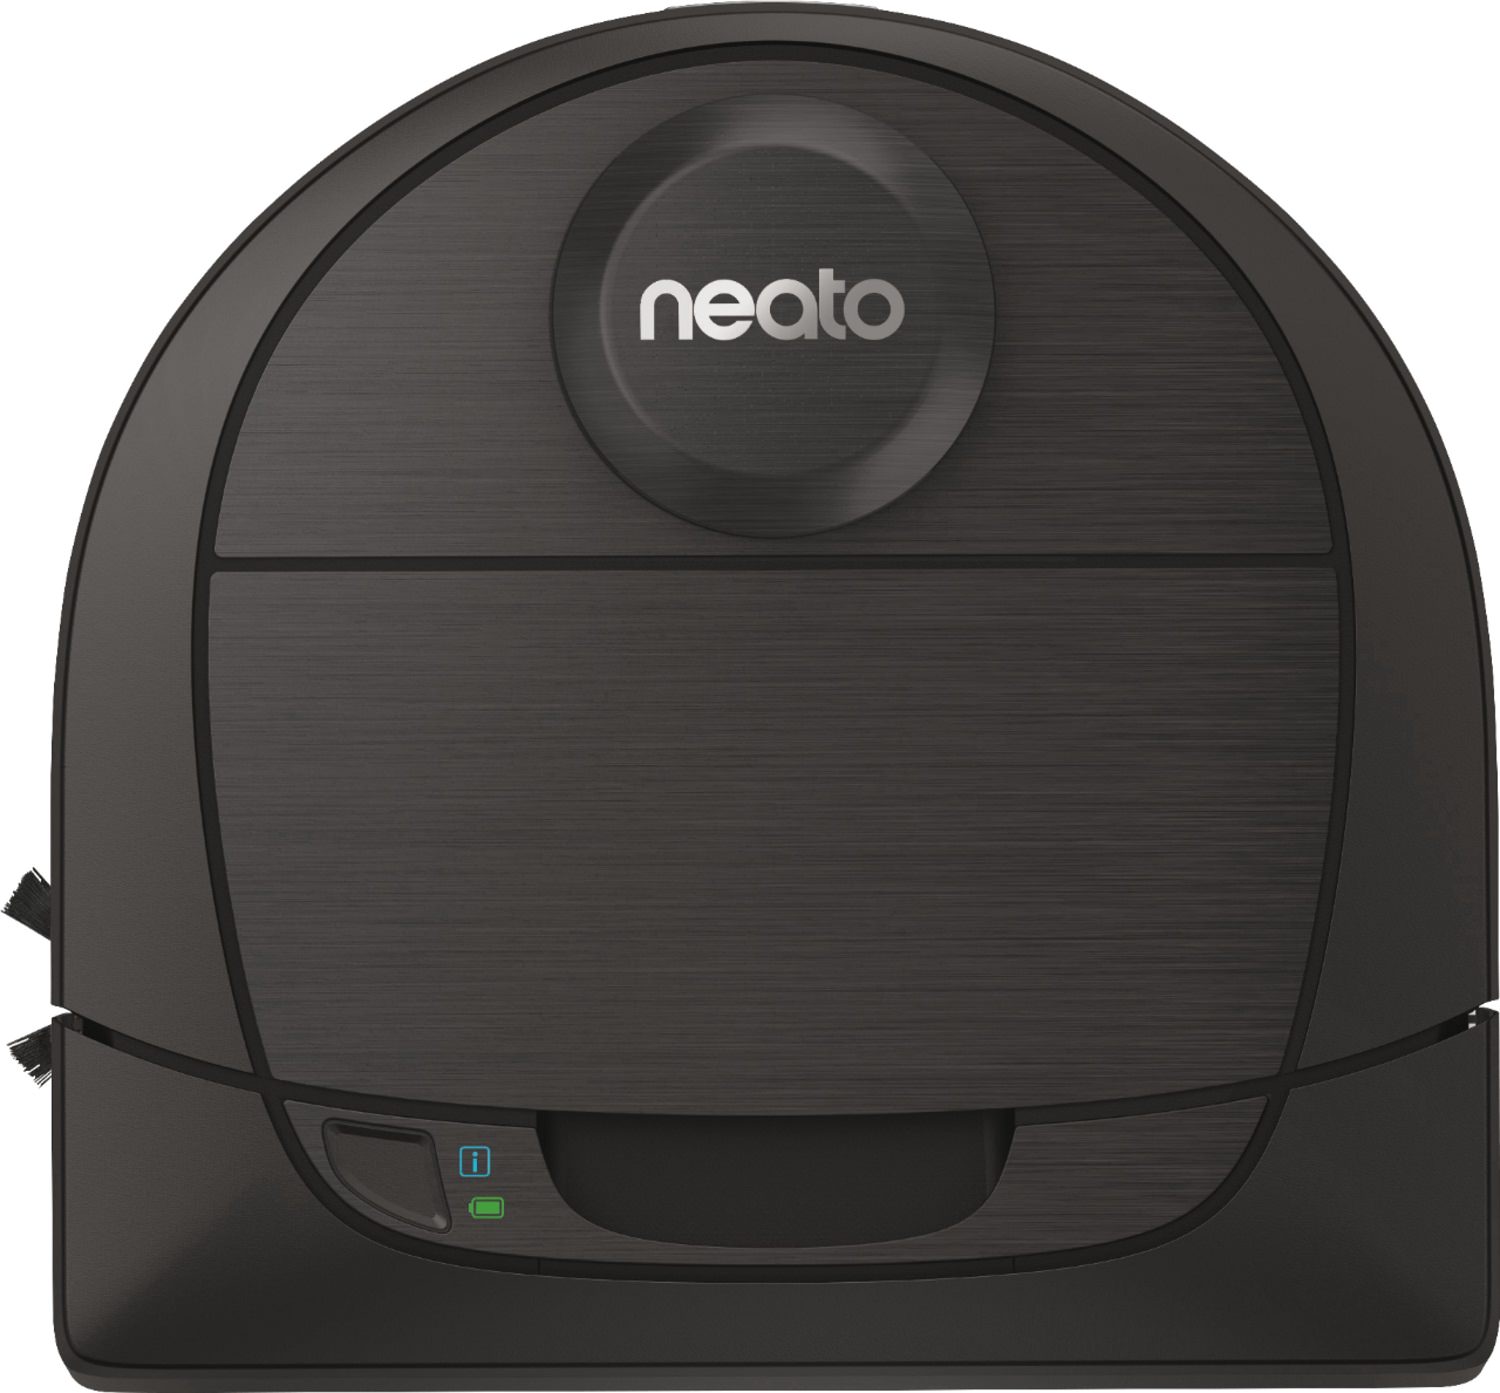 Neato Botvac D6 Wi-Fi Connected Robot Vacuum with Room Mapping - image 1 of 3